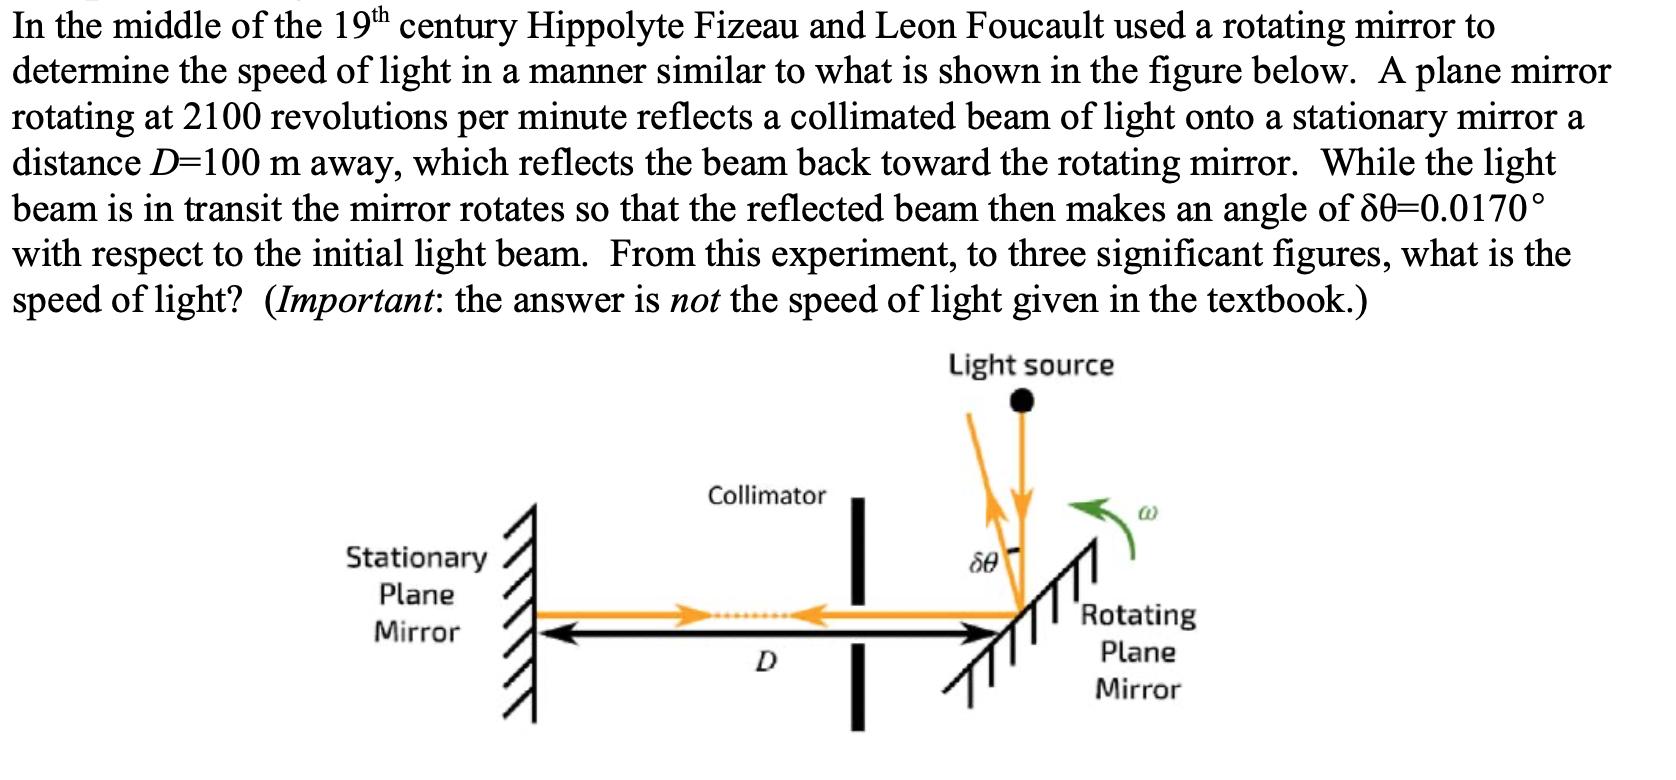 In the middle of the 19th century Hippolyte Fizeau and Leon Foucault used a rotating mirror to determine the speed of light i